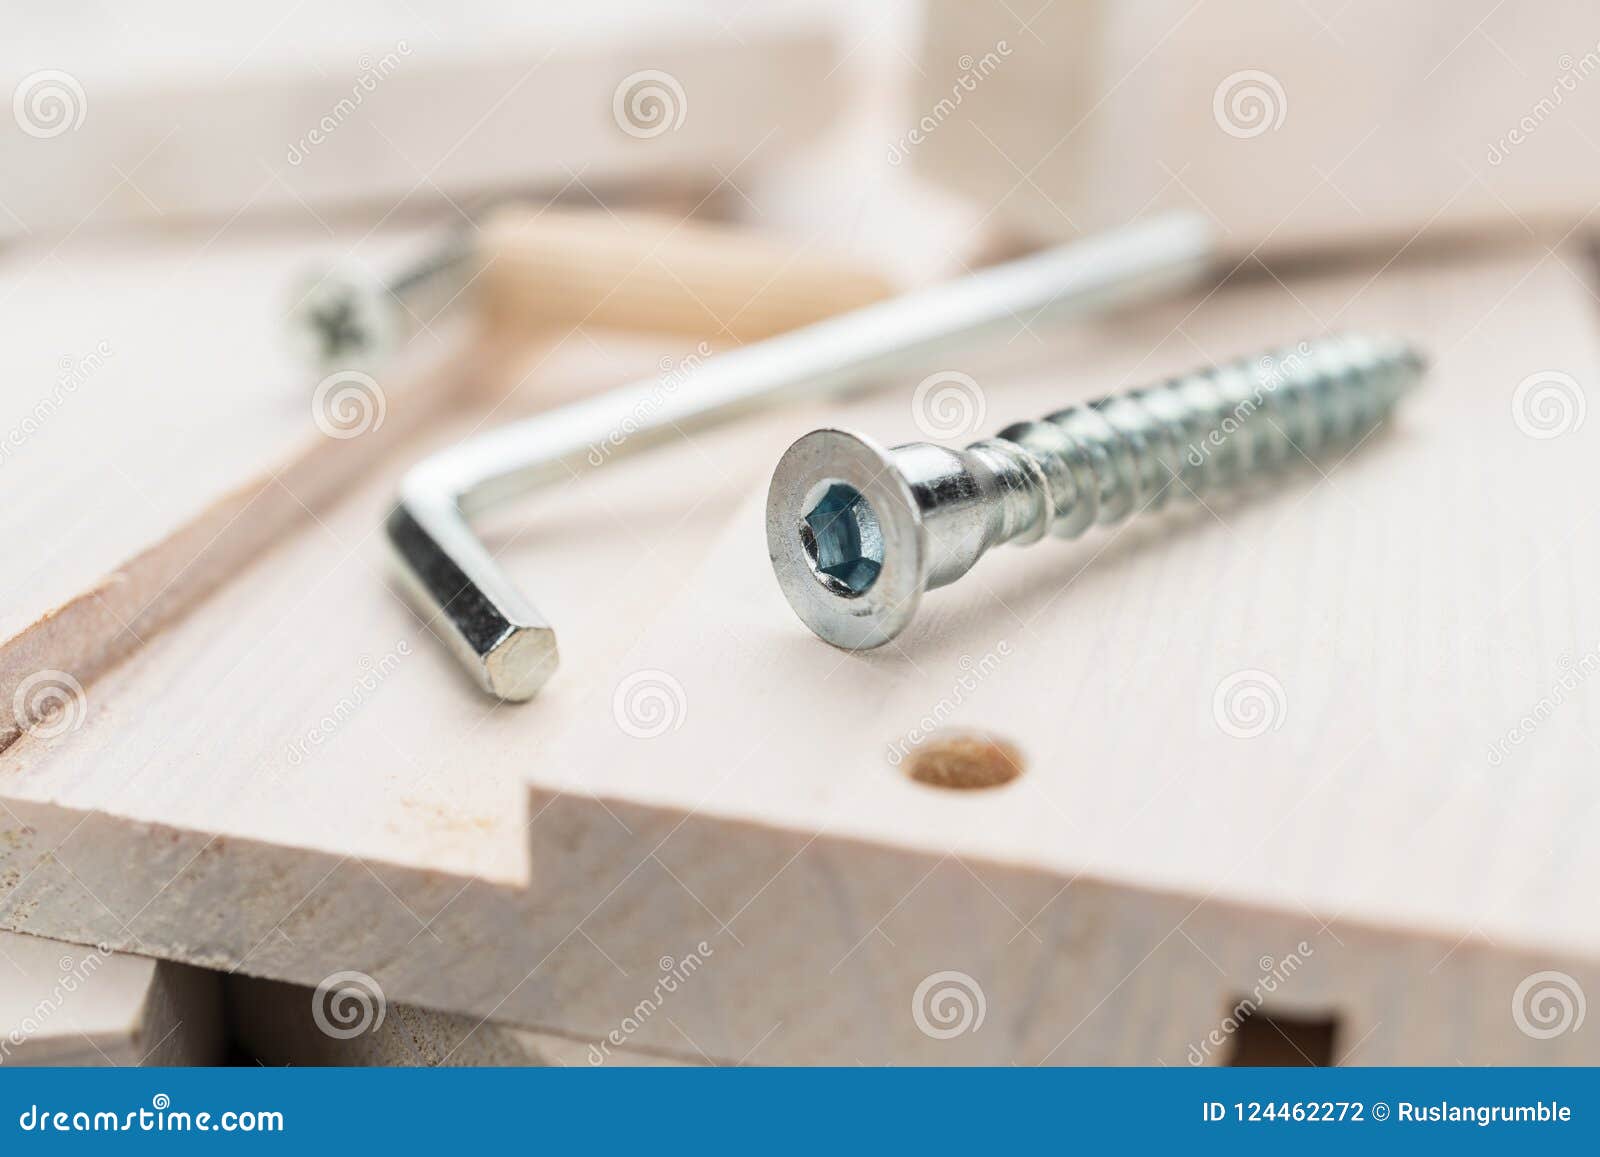 close-up photo of for furniture assembly on the wooden table